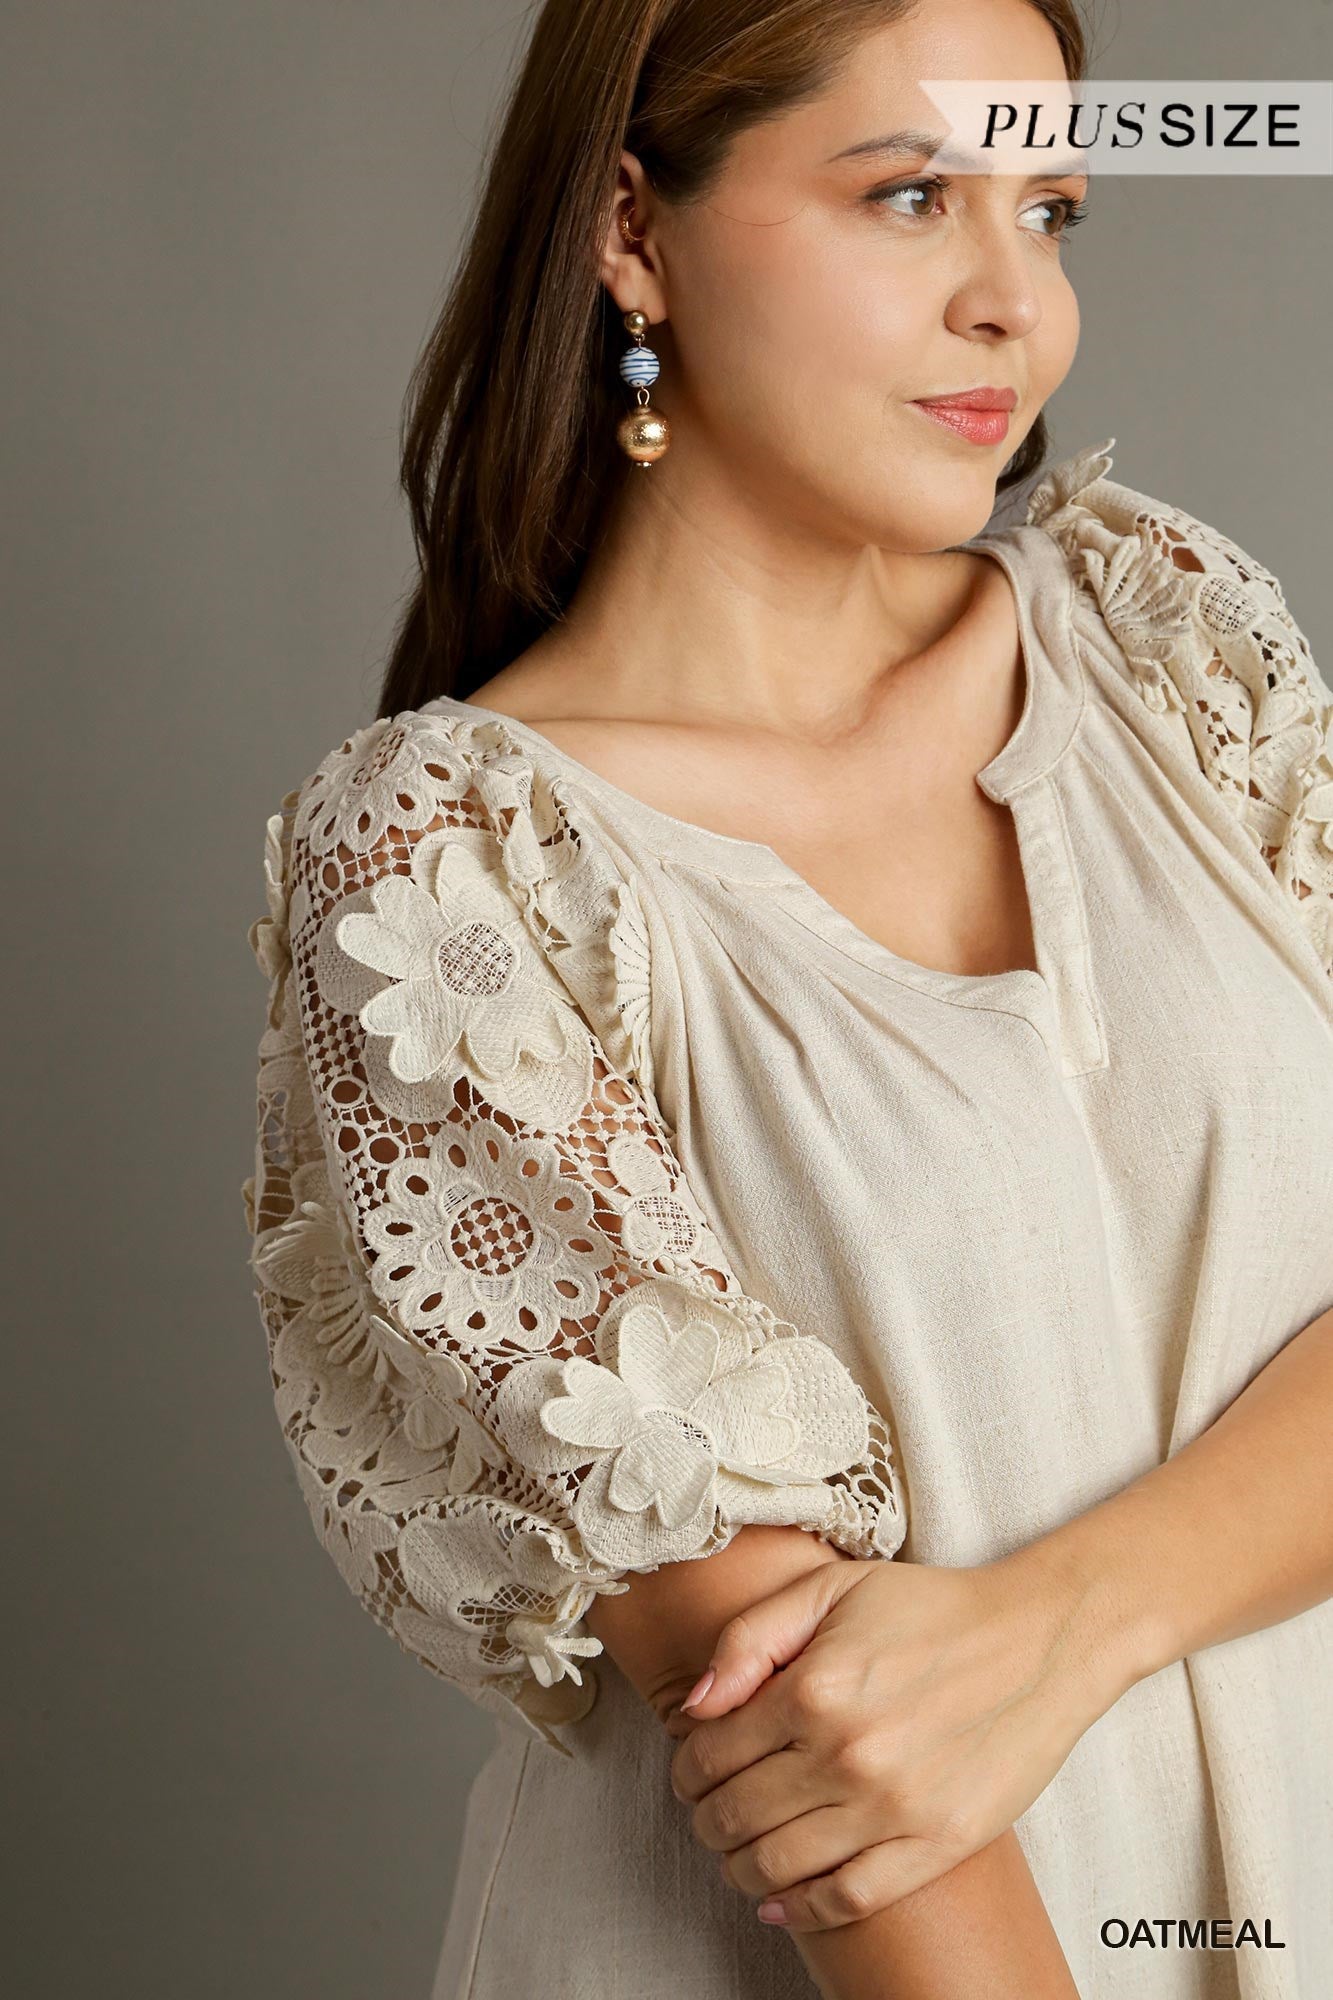 Oatmeal Linen Blend Top w/ Floral Lace Puff Sleeves